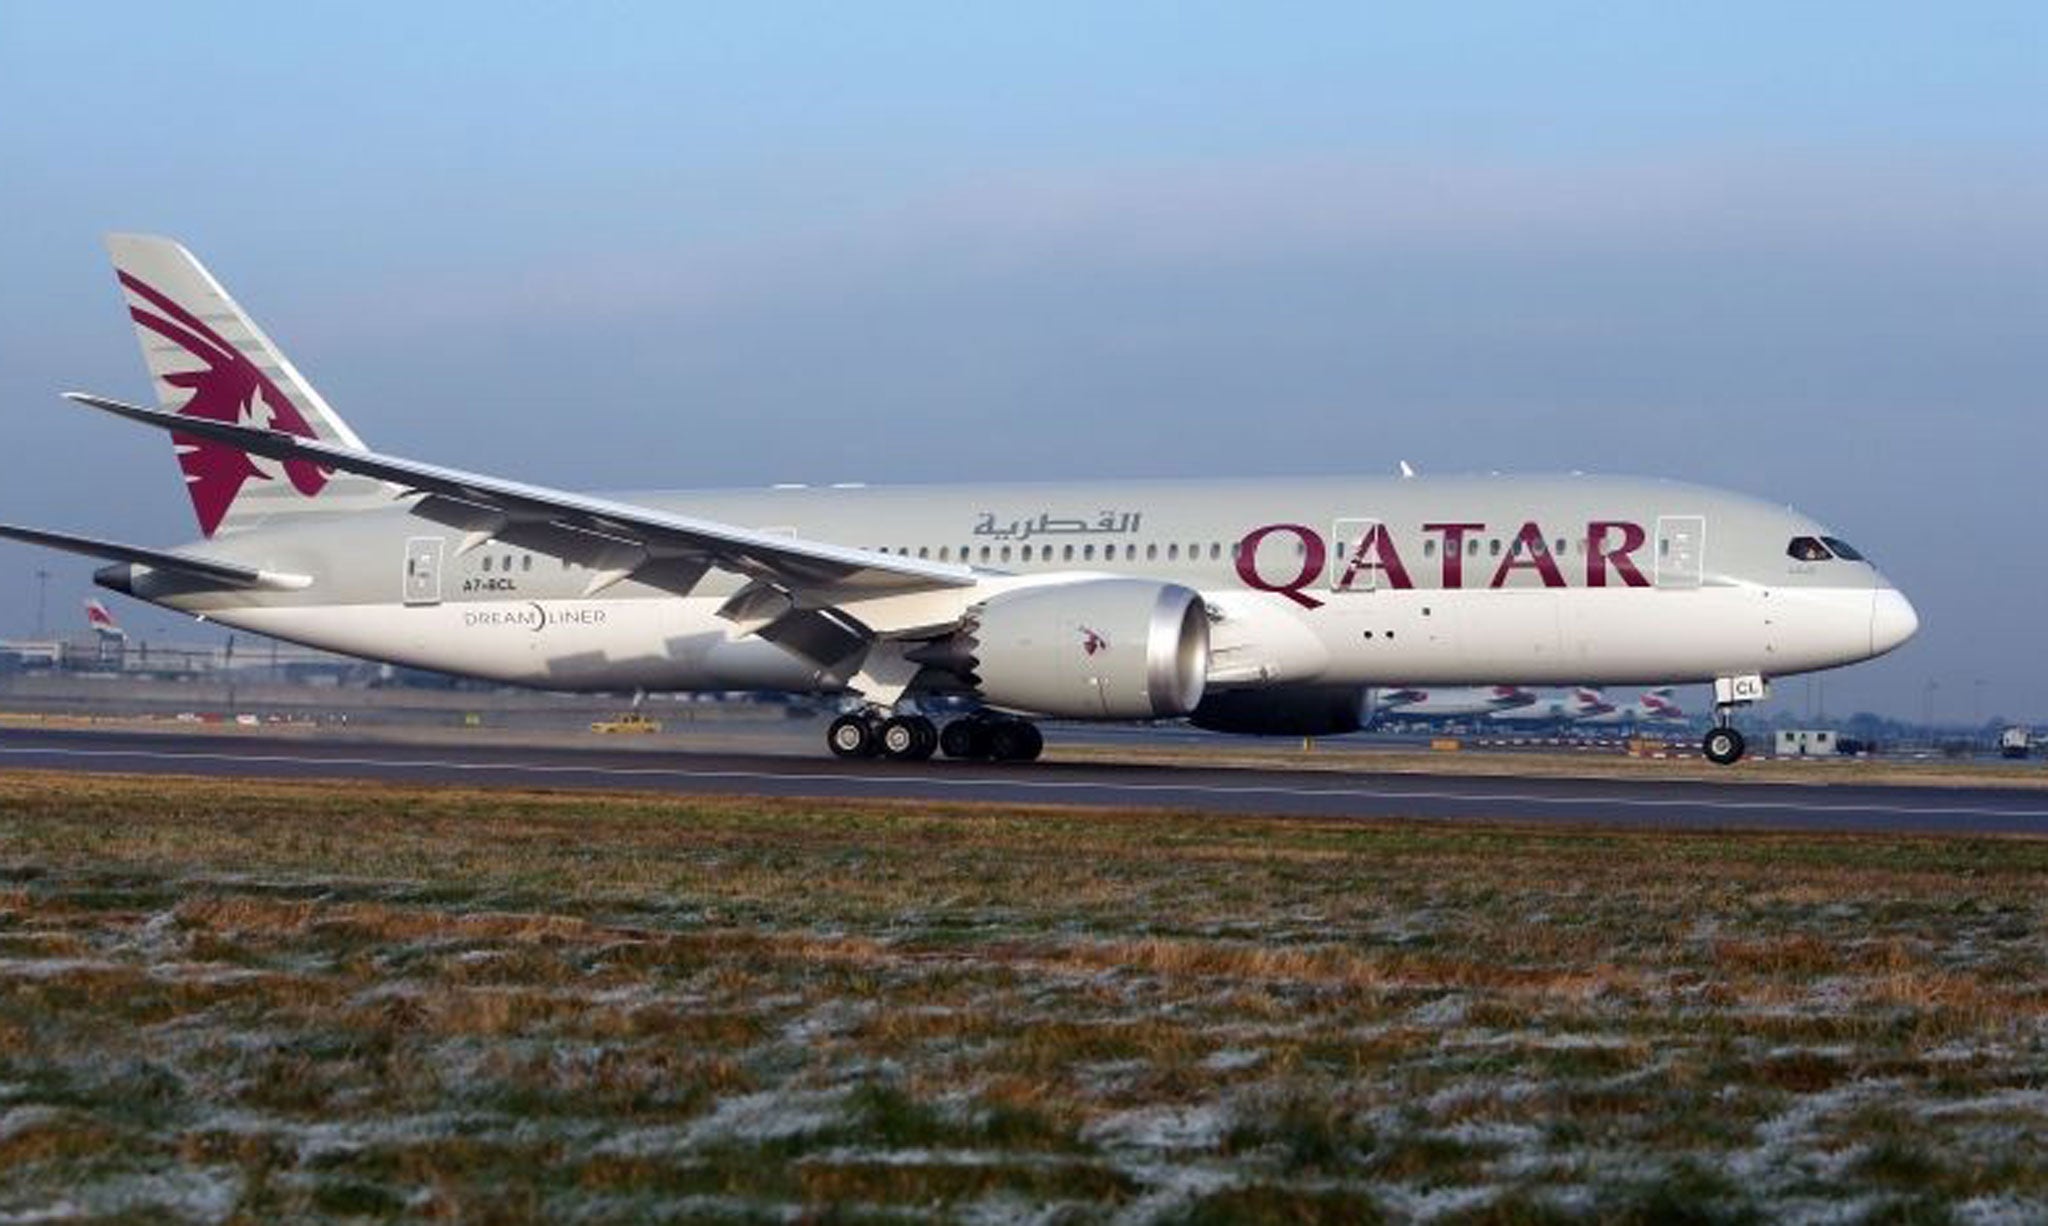 A Qatar Airways imposes strict standards on its staff